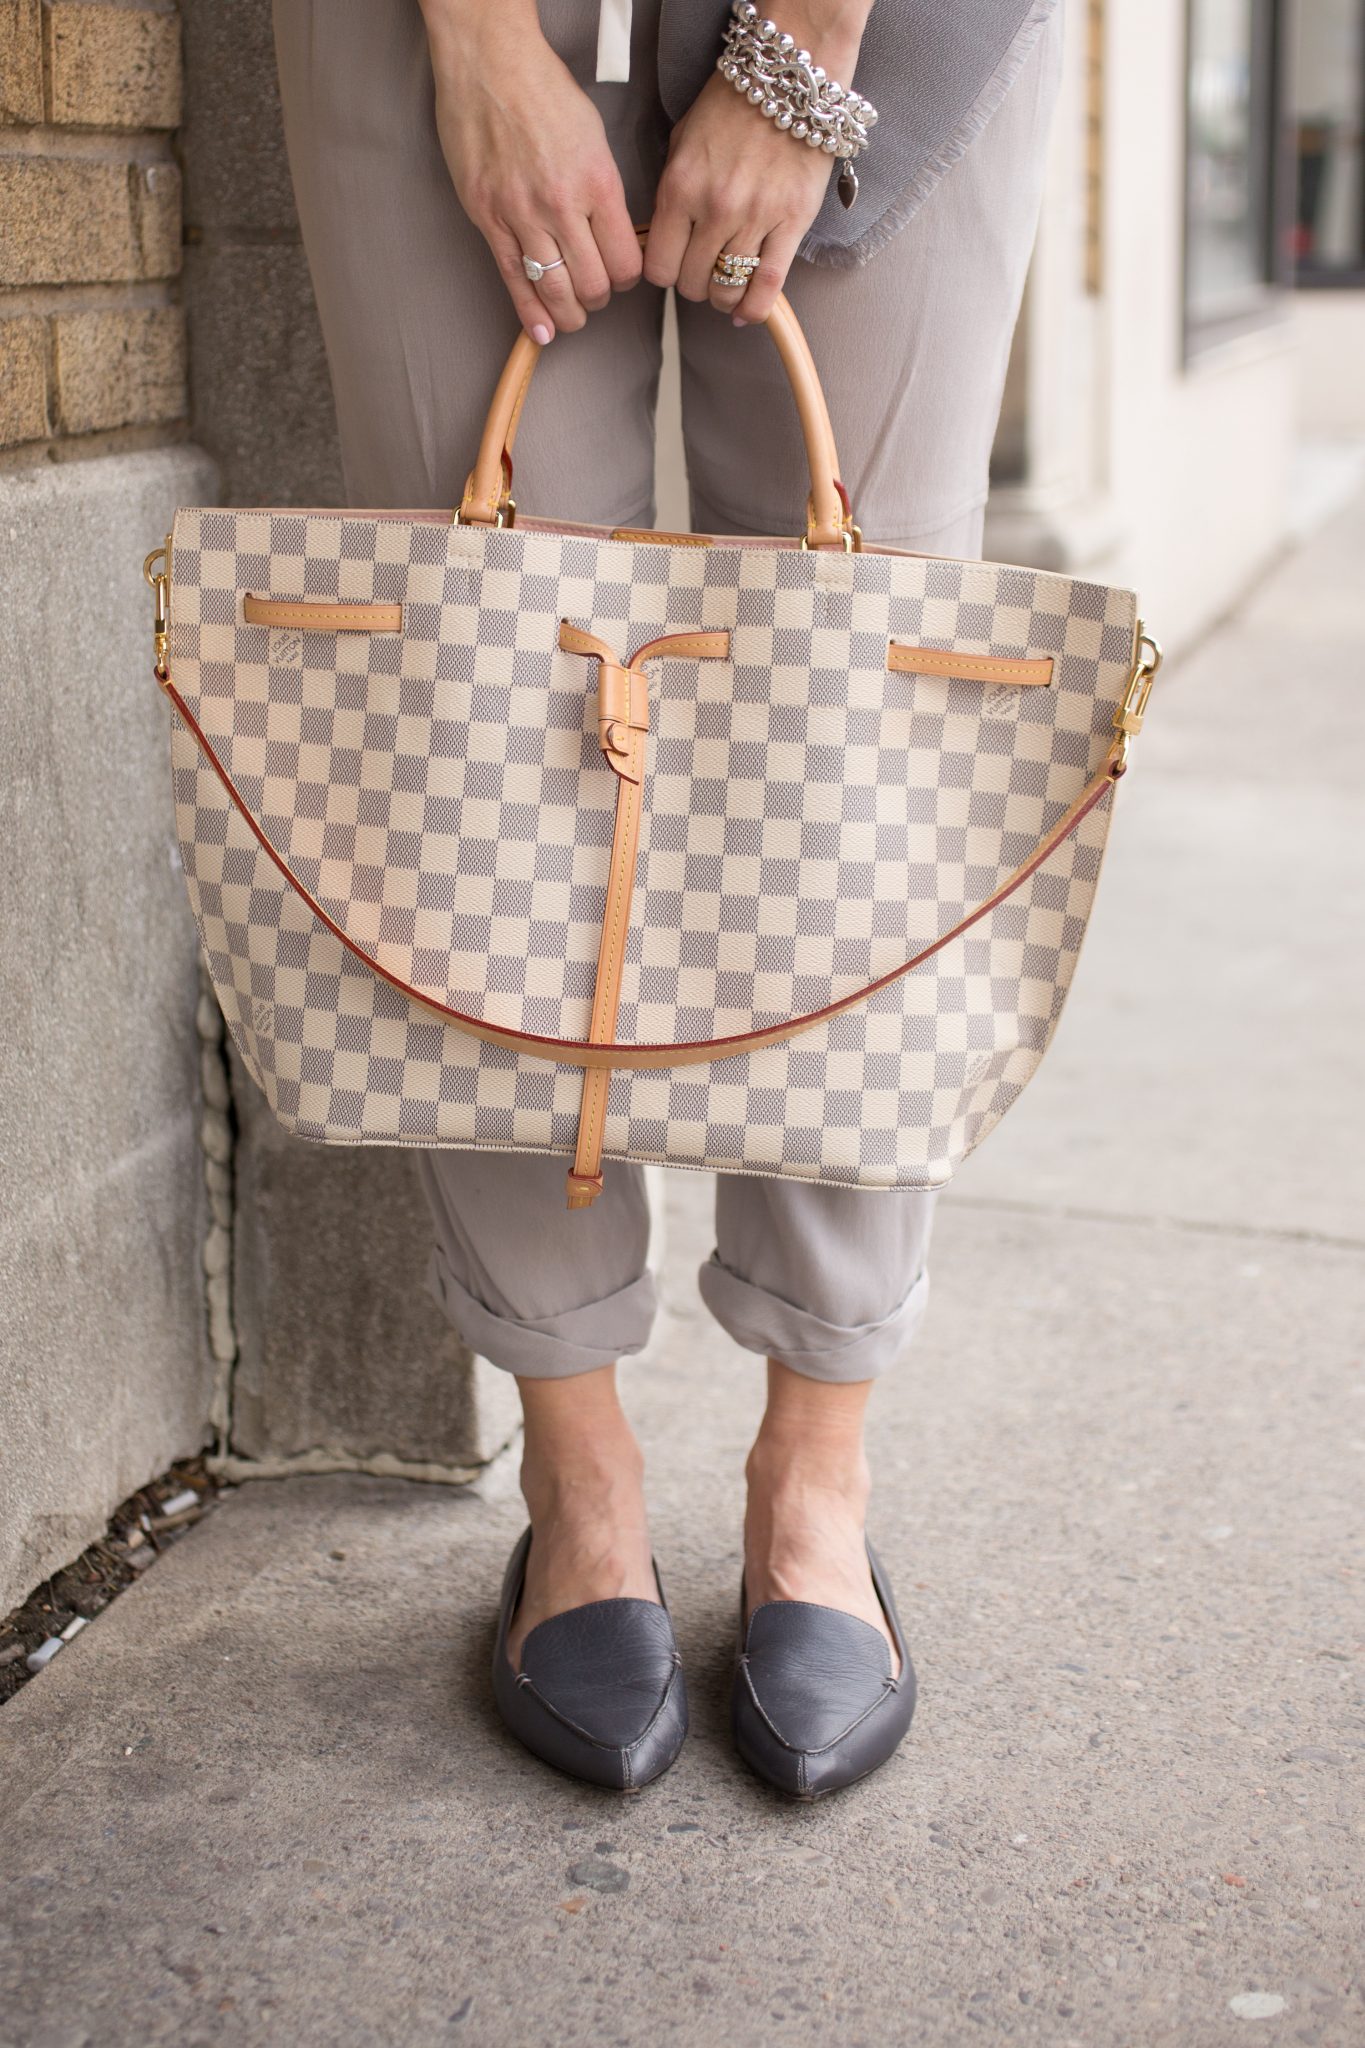 Wilfred Allant Pant from Aritzia, grey Louis Vuitton Scarf, Louis Vuitton Girlolata Bag, grey Karl Lagerfeld loafers